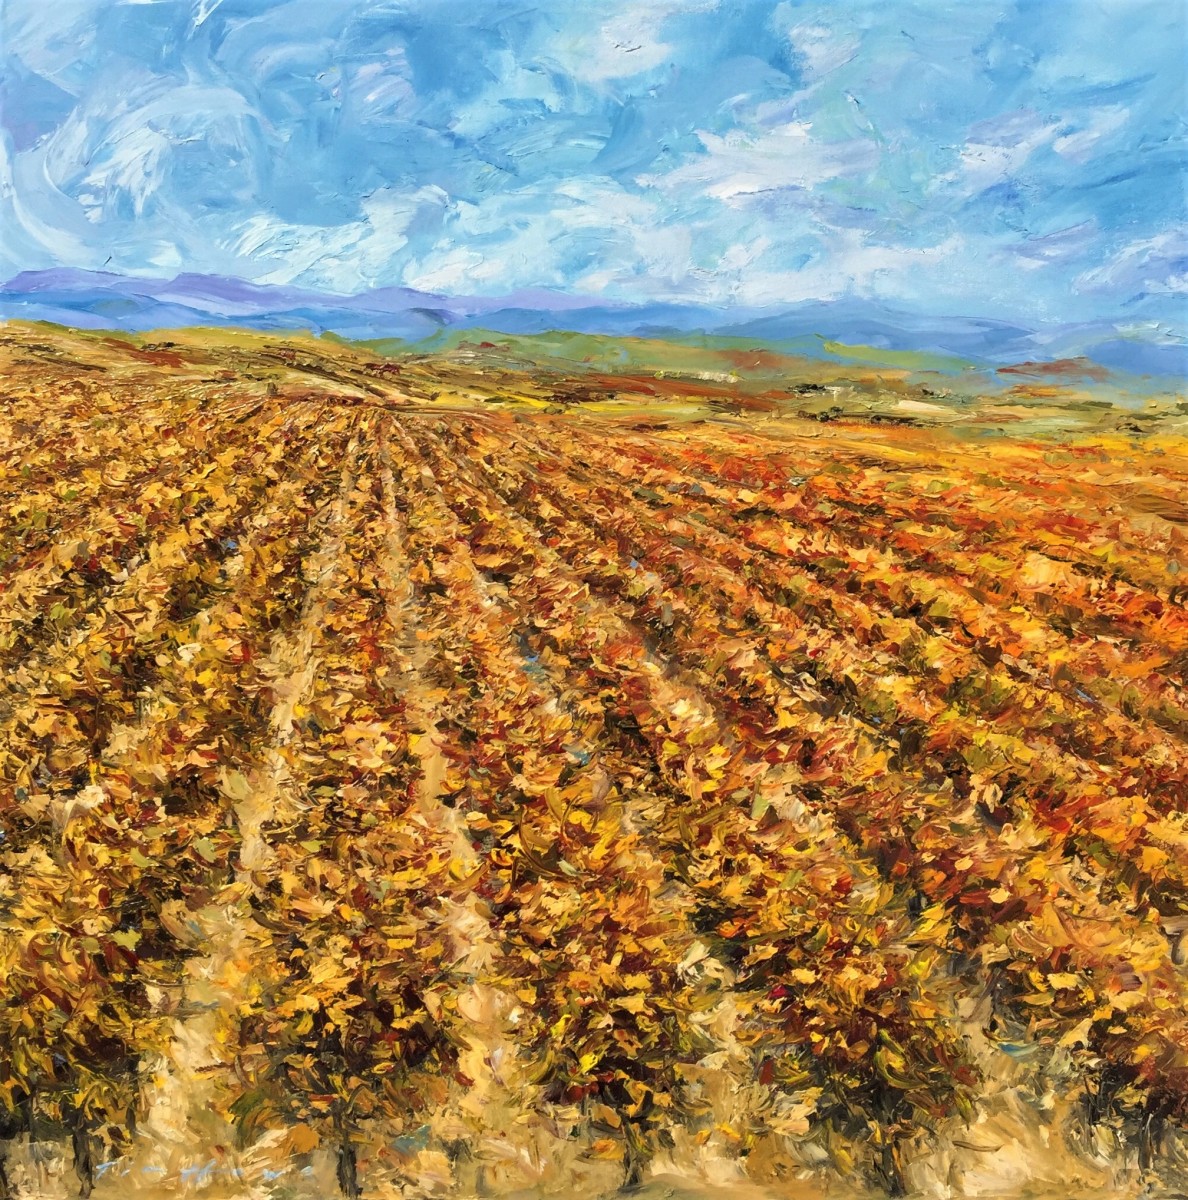 The Vines Of Autumn by Tim Howe 